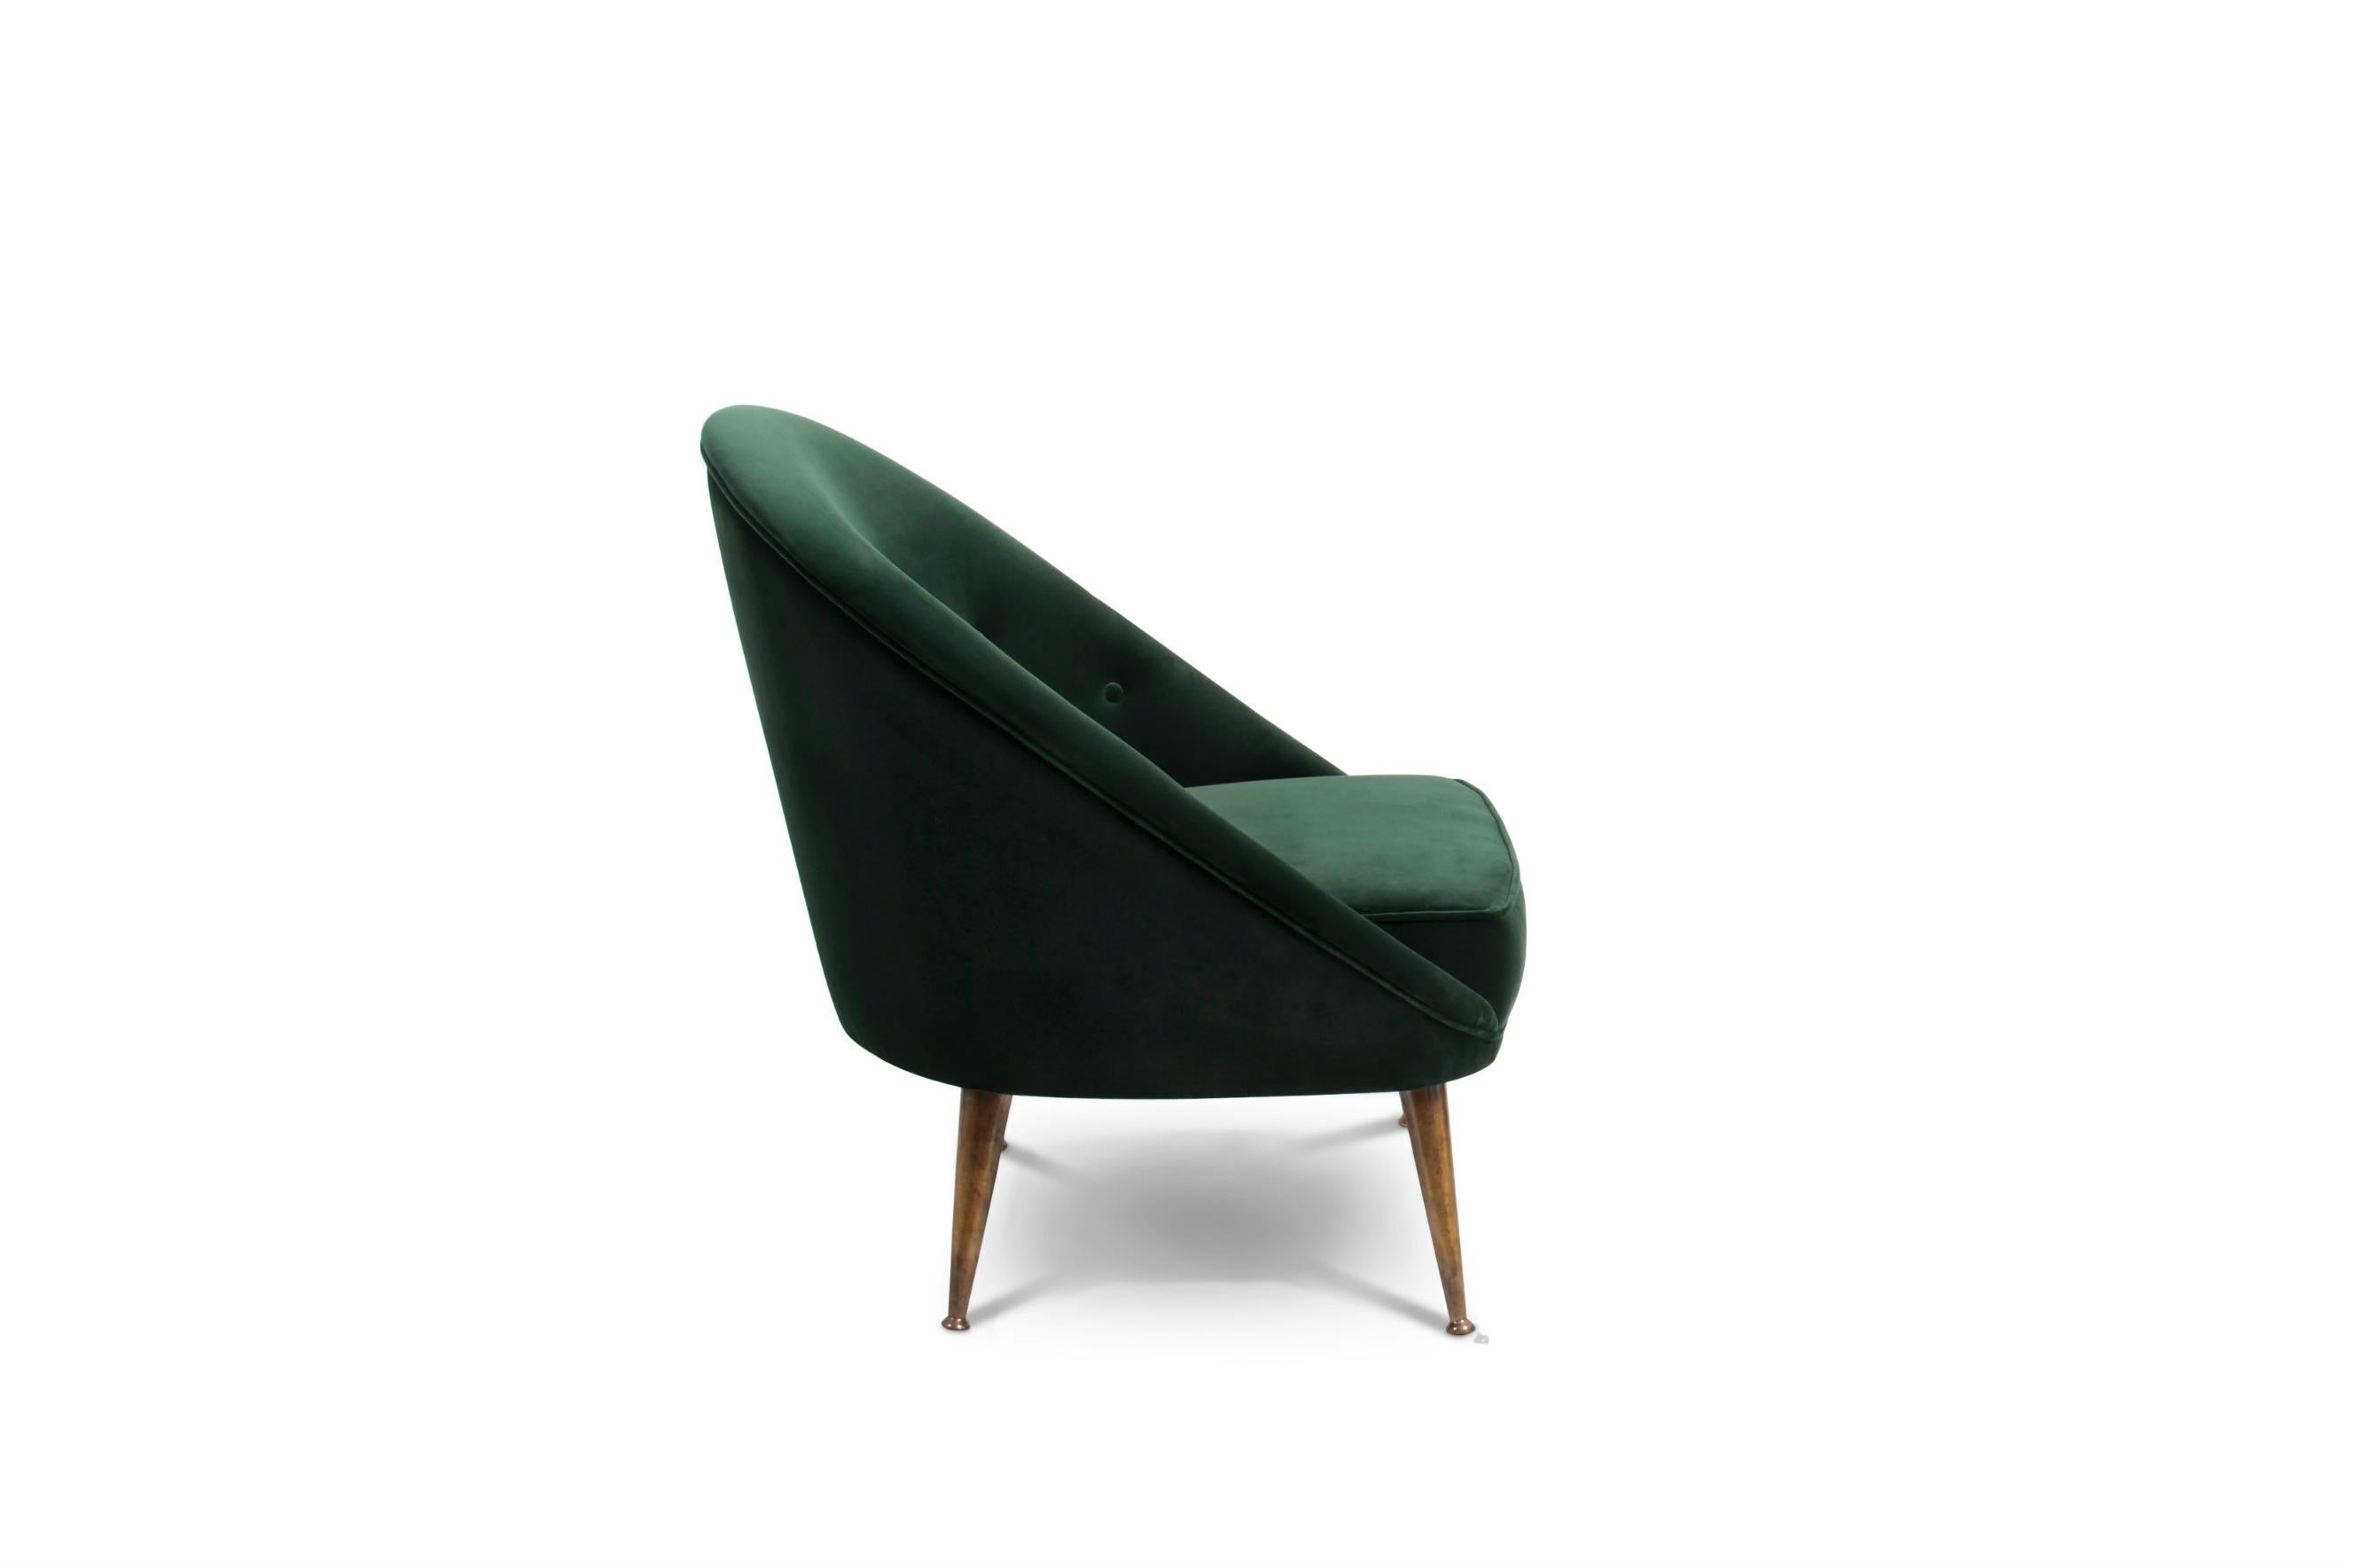 The ethnicities of the mesmerizing Malay Archipelago inspired the creation of MALAY velvet armchair, a twist on Mid-Century Modern furniture. This tufted upholstered chair with aged brass legs has a mystical soul that will fulfill your living room